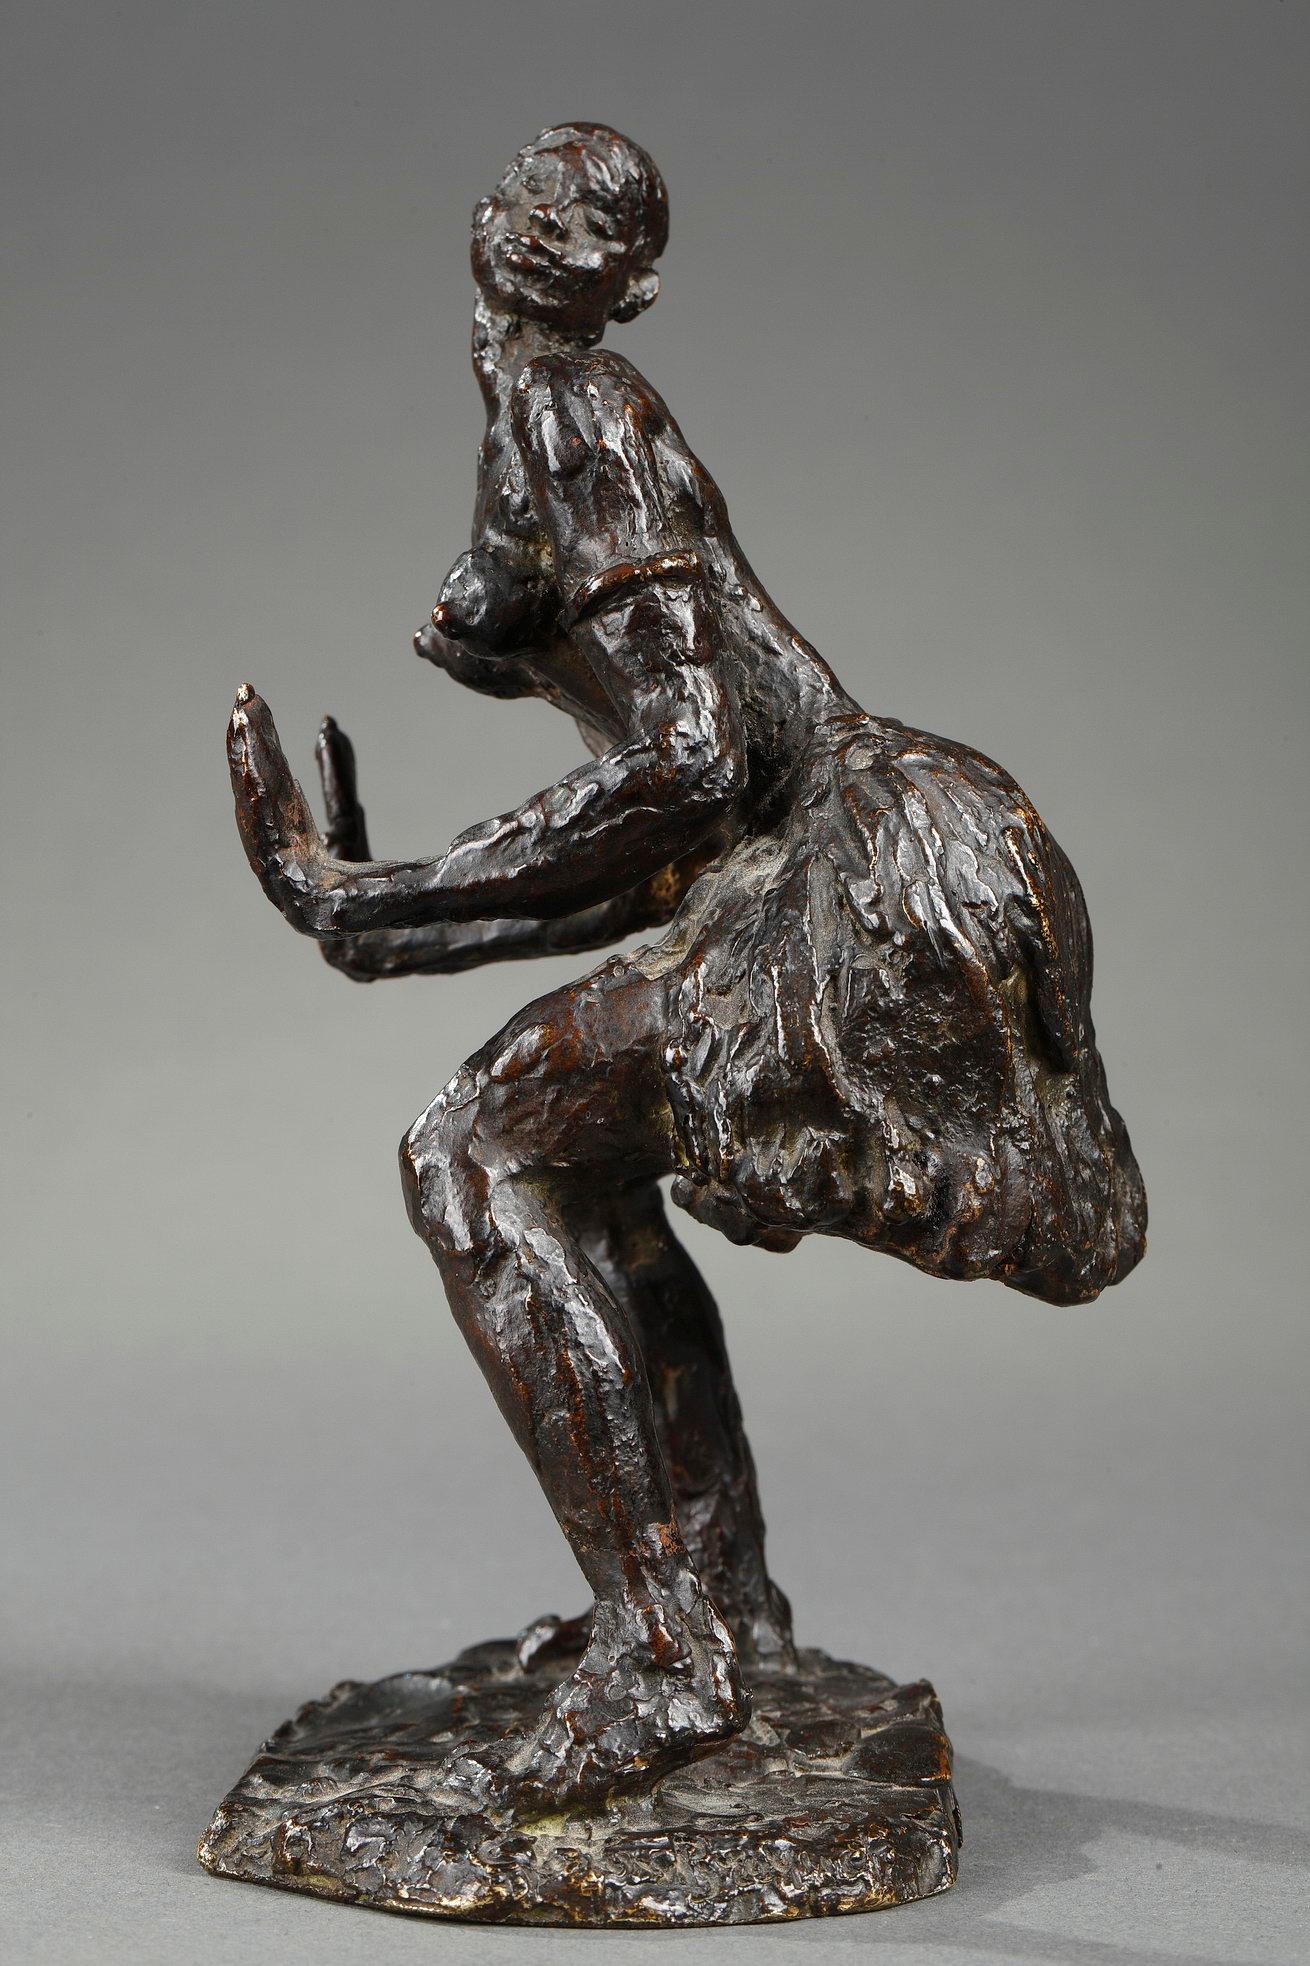 African Dancer
by Gaston Broquet (1880-1947)
 
Bronze with brown patina nuanced
cast by Susse

France
circa 1920
Height 15 cm

Biography
Gaston Broquet (1880-1947) is a French sculptor. He spent his childhood in Void where his parents hold a